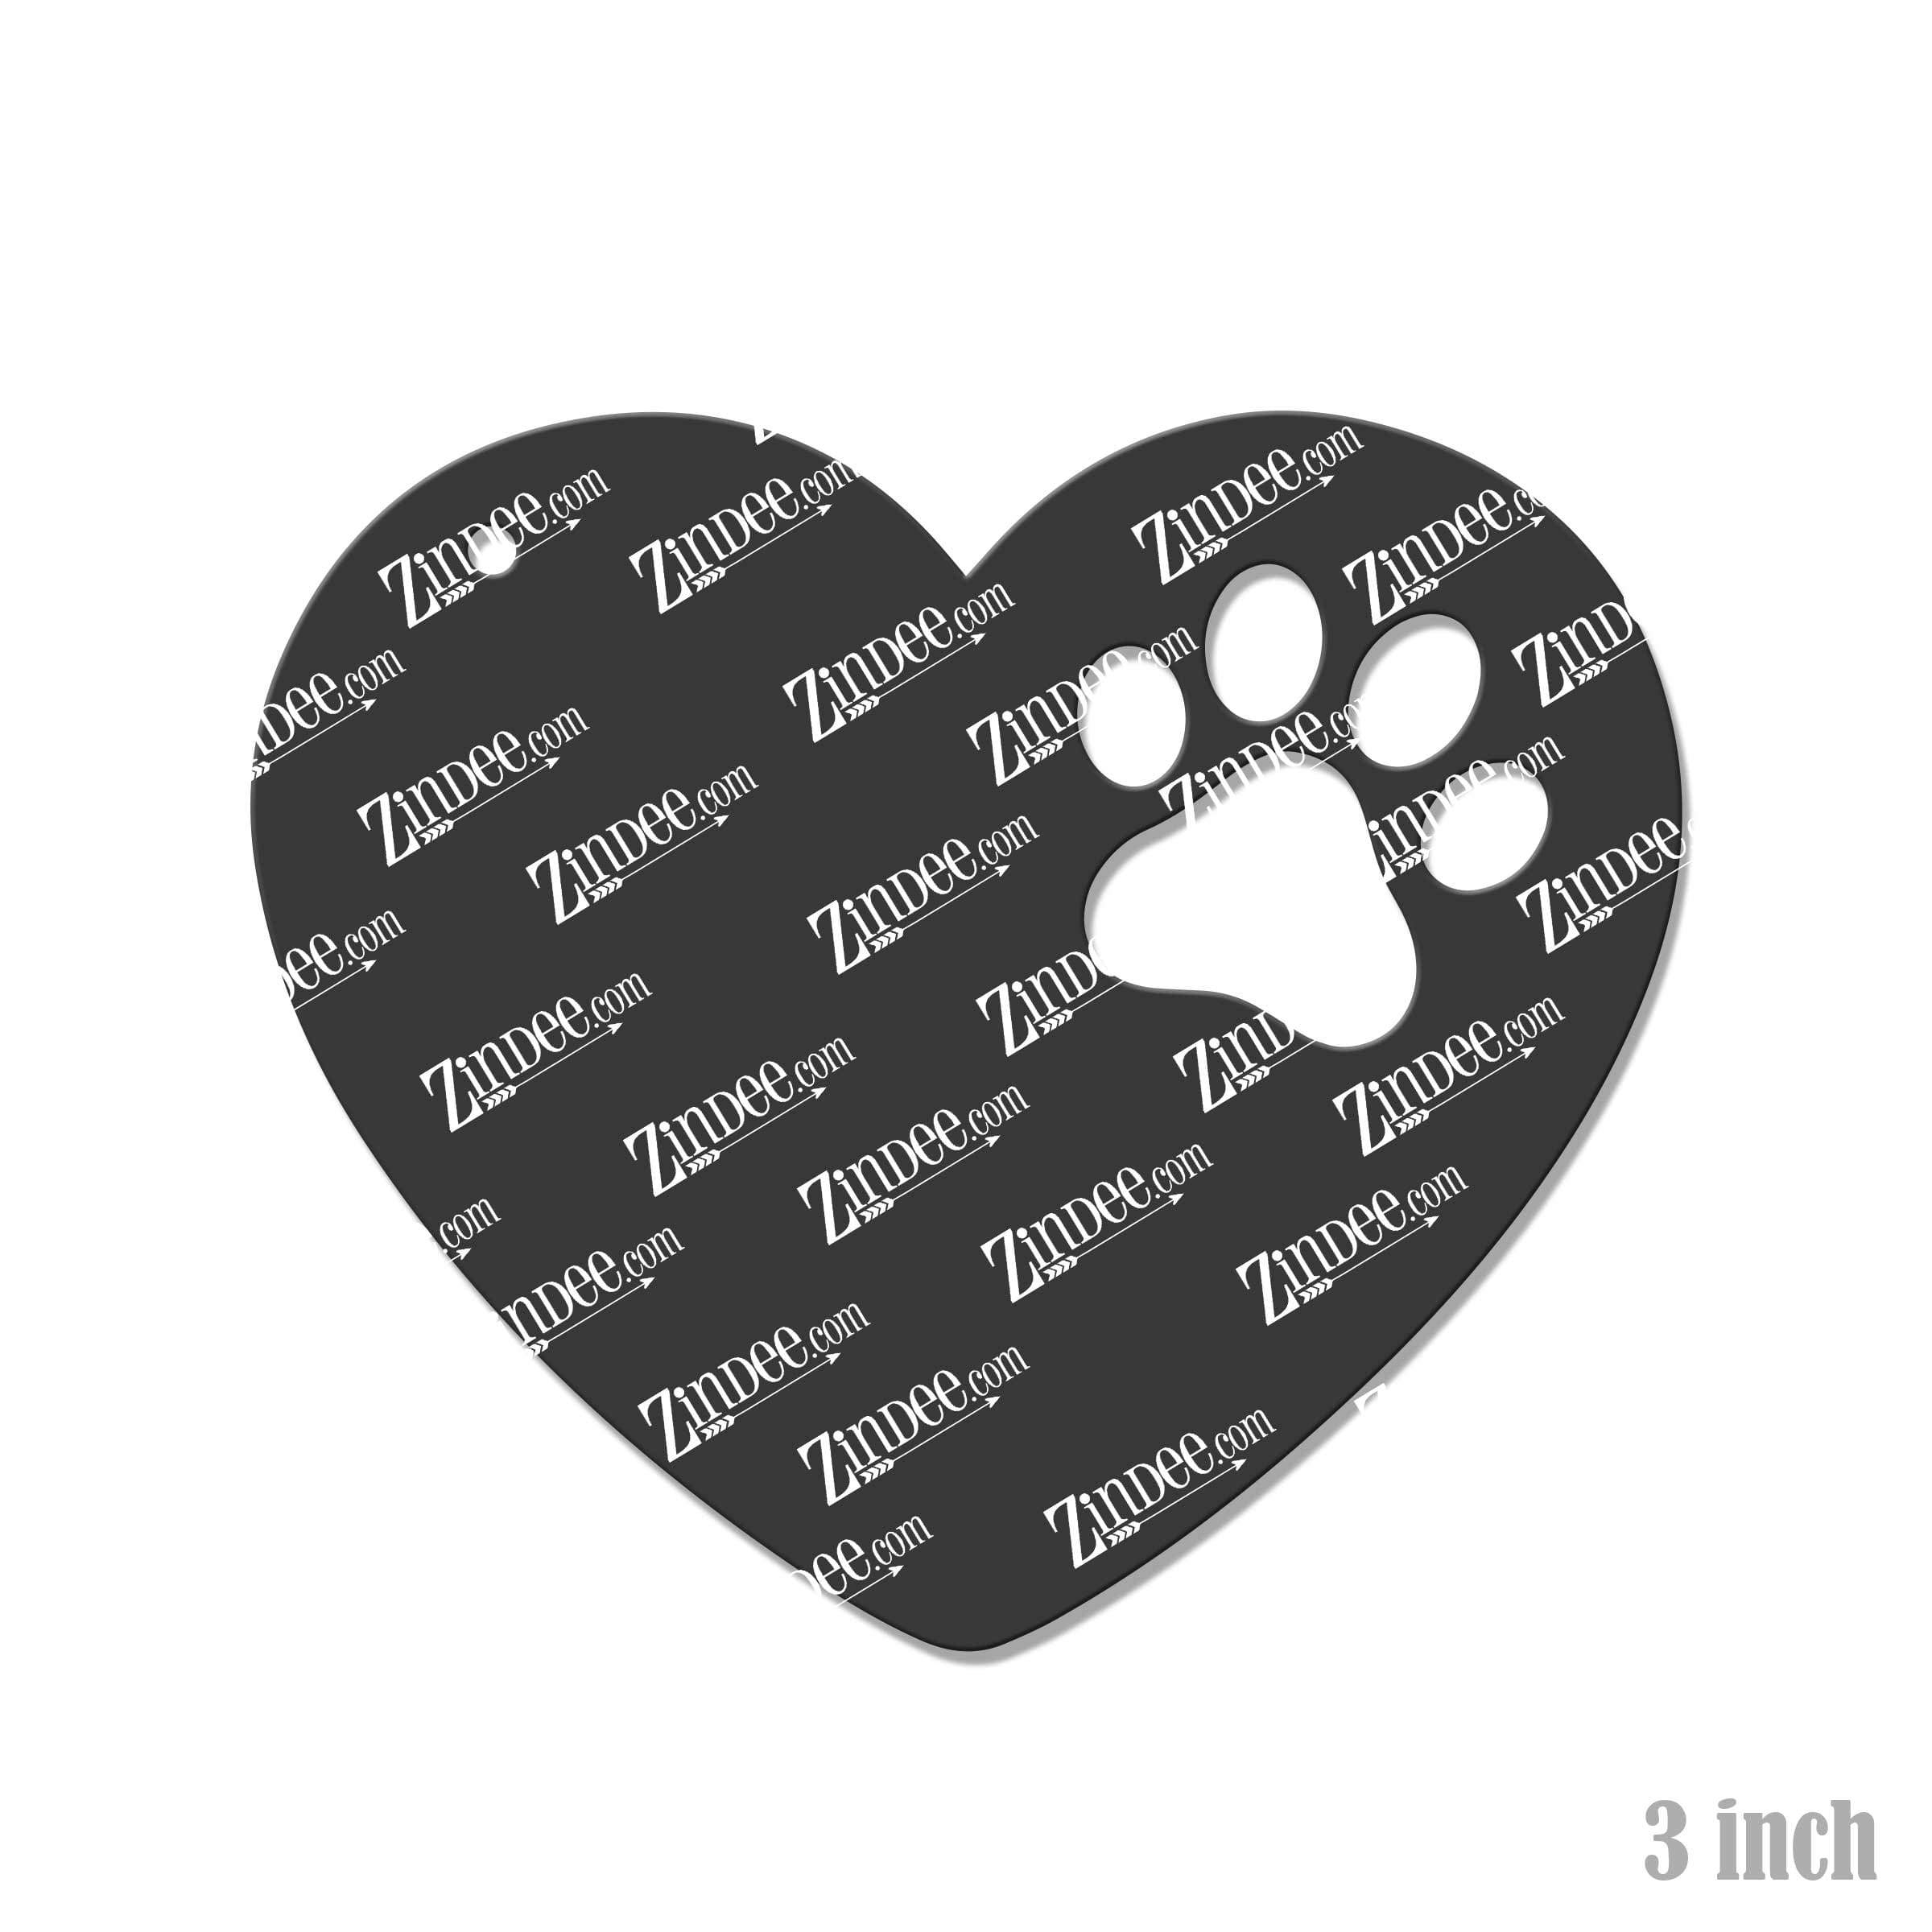 Dog Paw Silhouette Heart Vinyl Decal Sticker for Windows, Laptop, Boards,  etc!